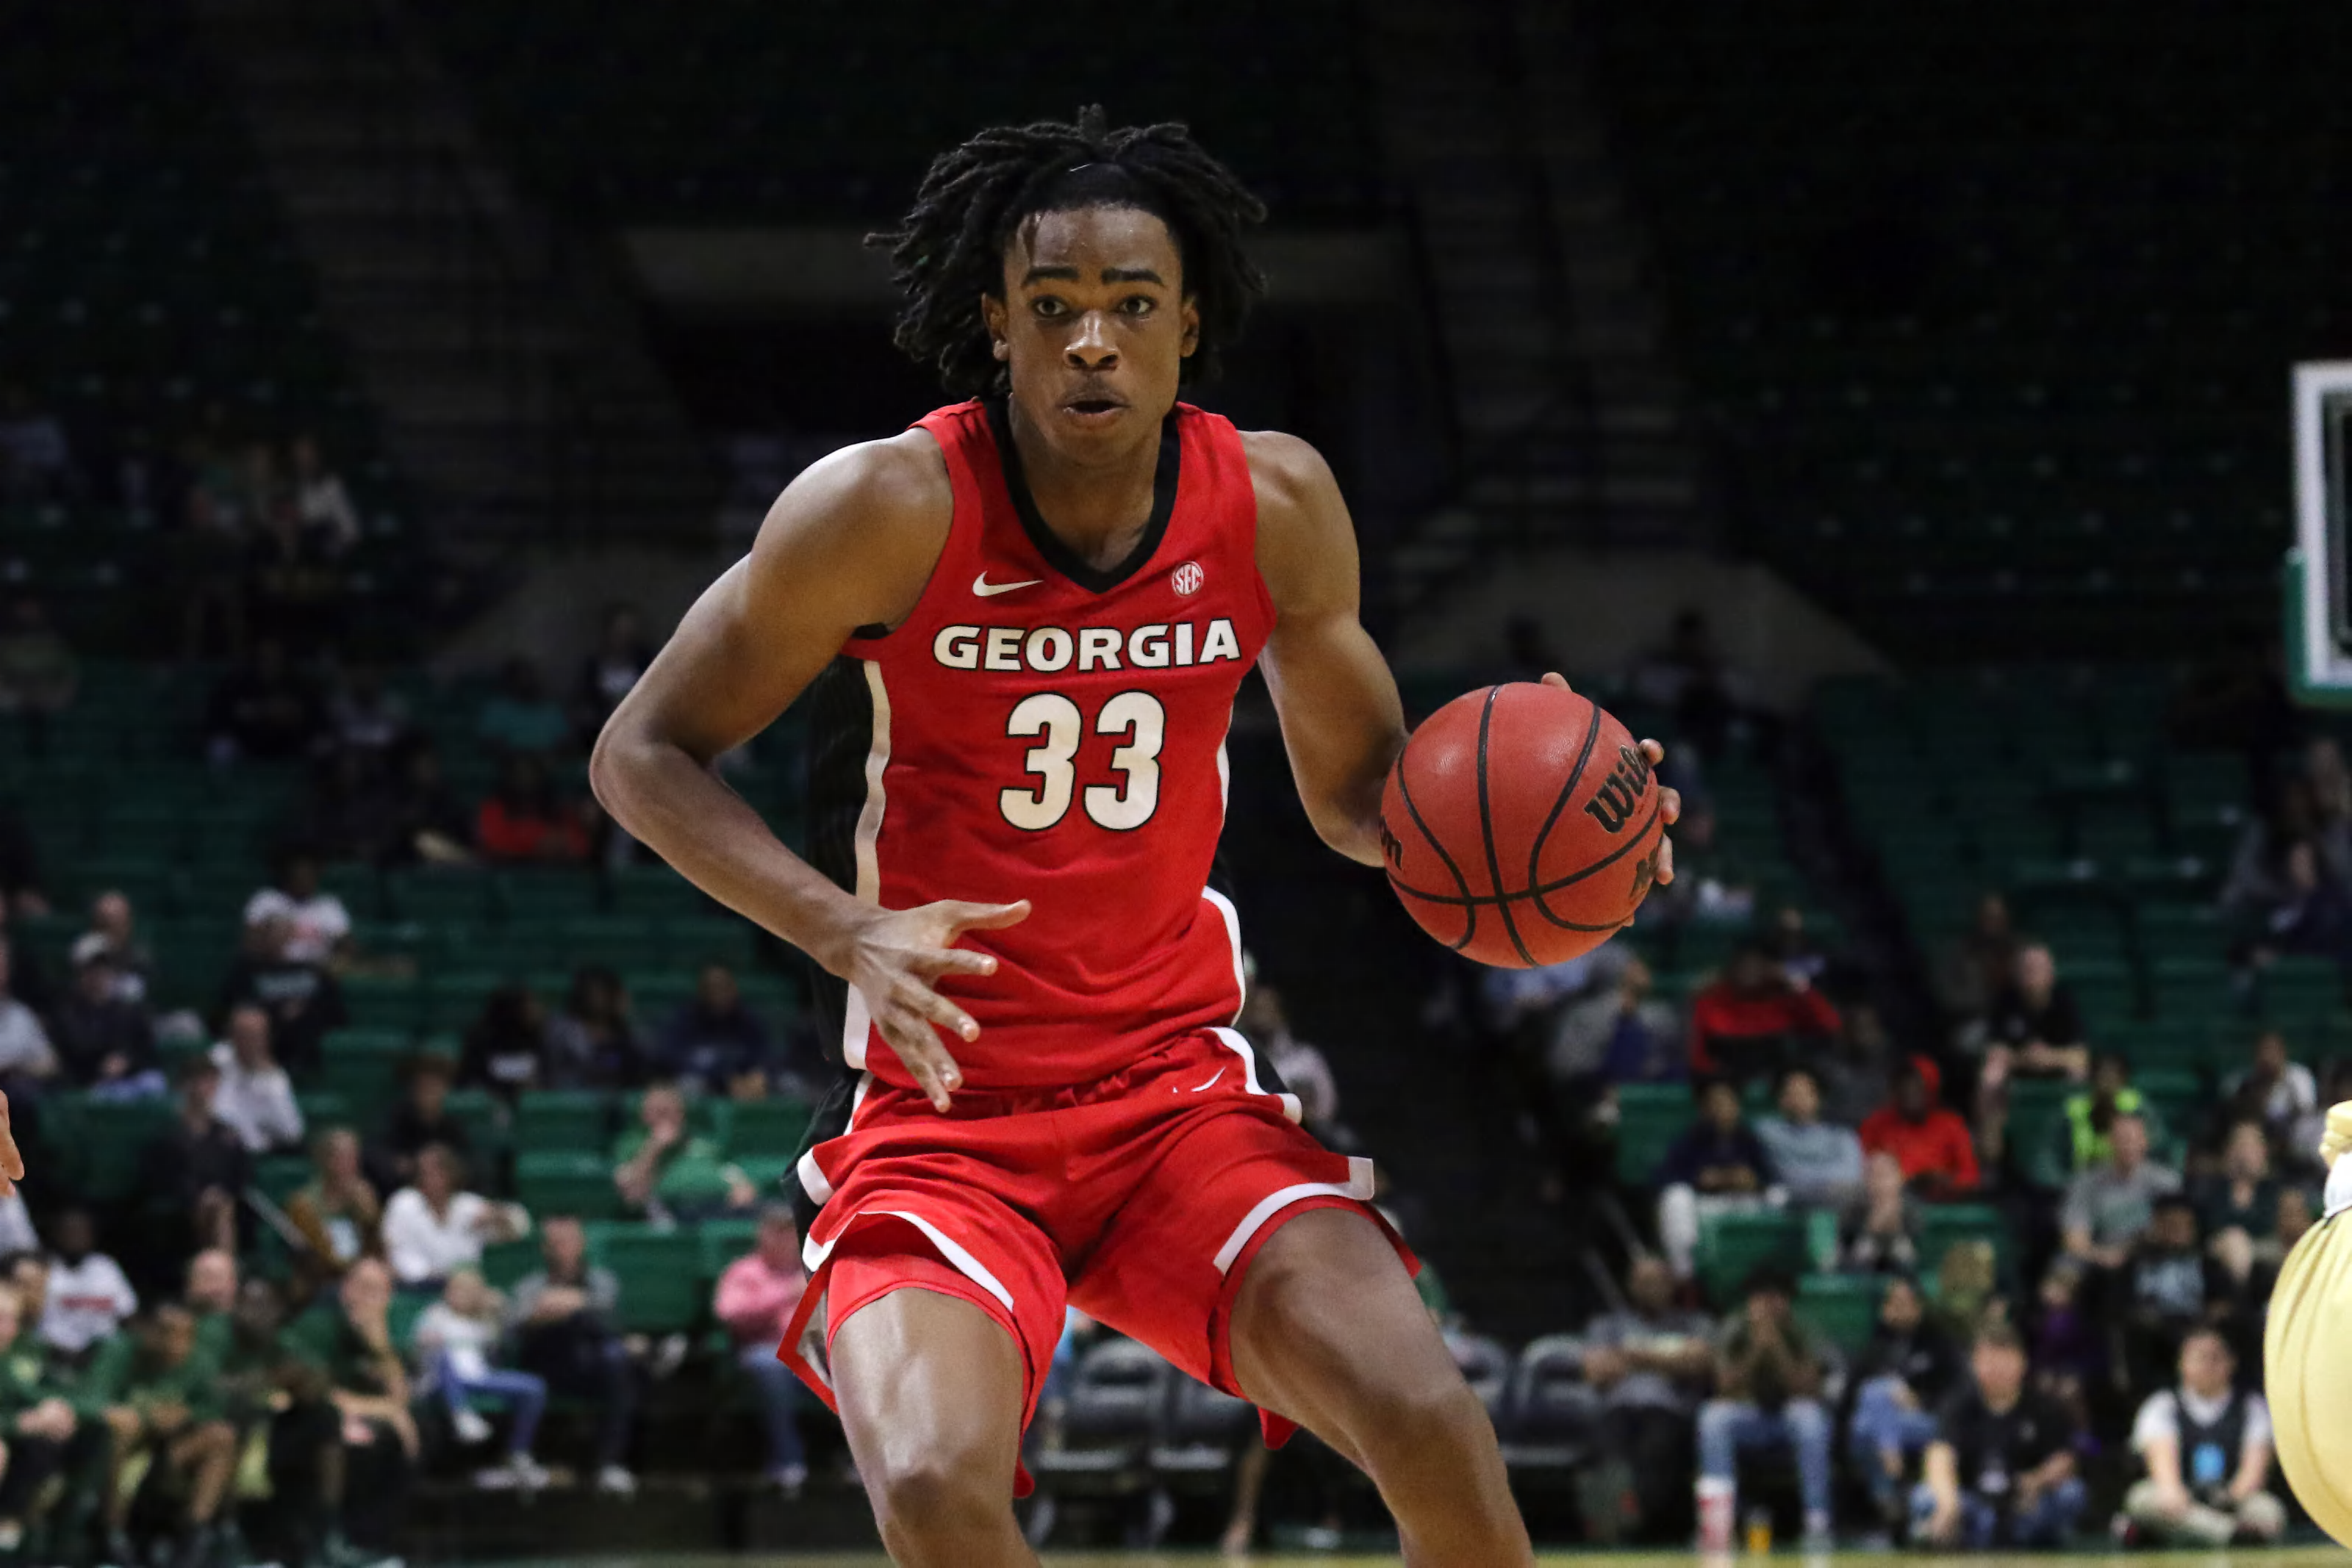 2019 NBA Draft: For Atlanta Hawks, Nicolas Claxton Could Be a Steal